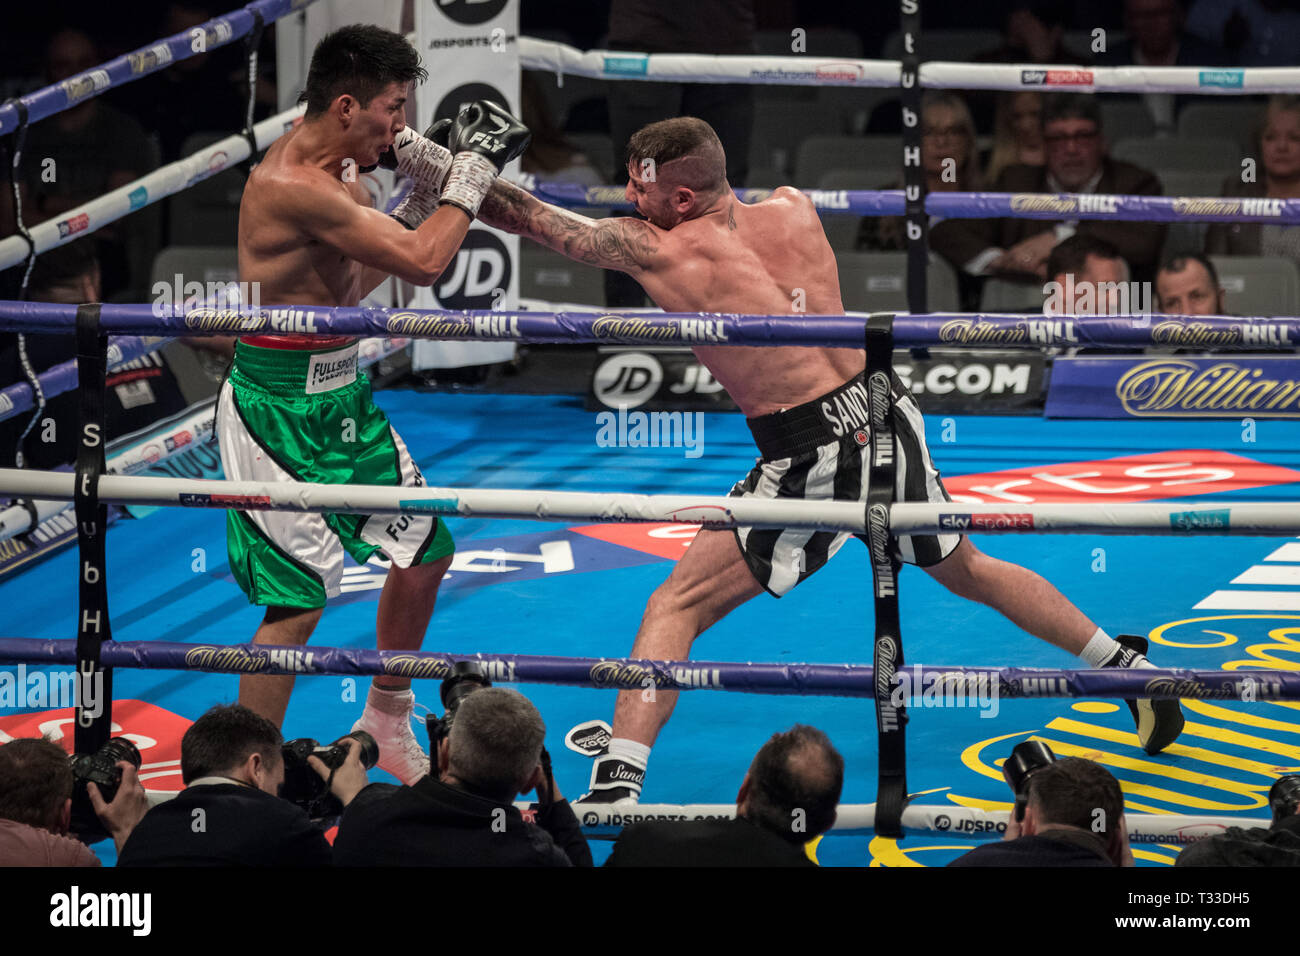 Lewis Ritson vs German Argentino Benitez. Ritson wins WBA Intercontinental Super-Lightweight Title on points 98-92, 98-92, 99-91 at Copper Box Arena. Stock Photo